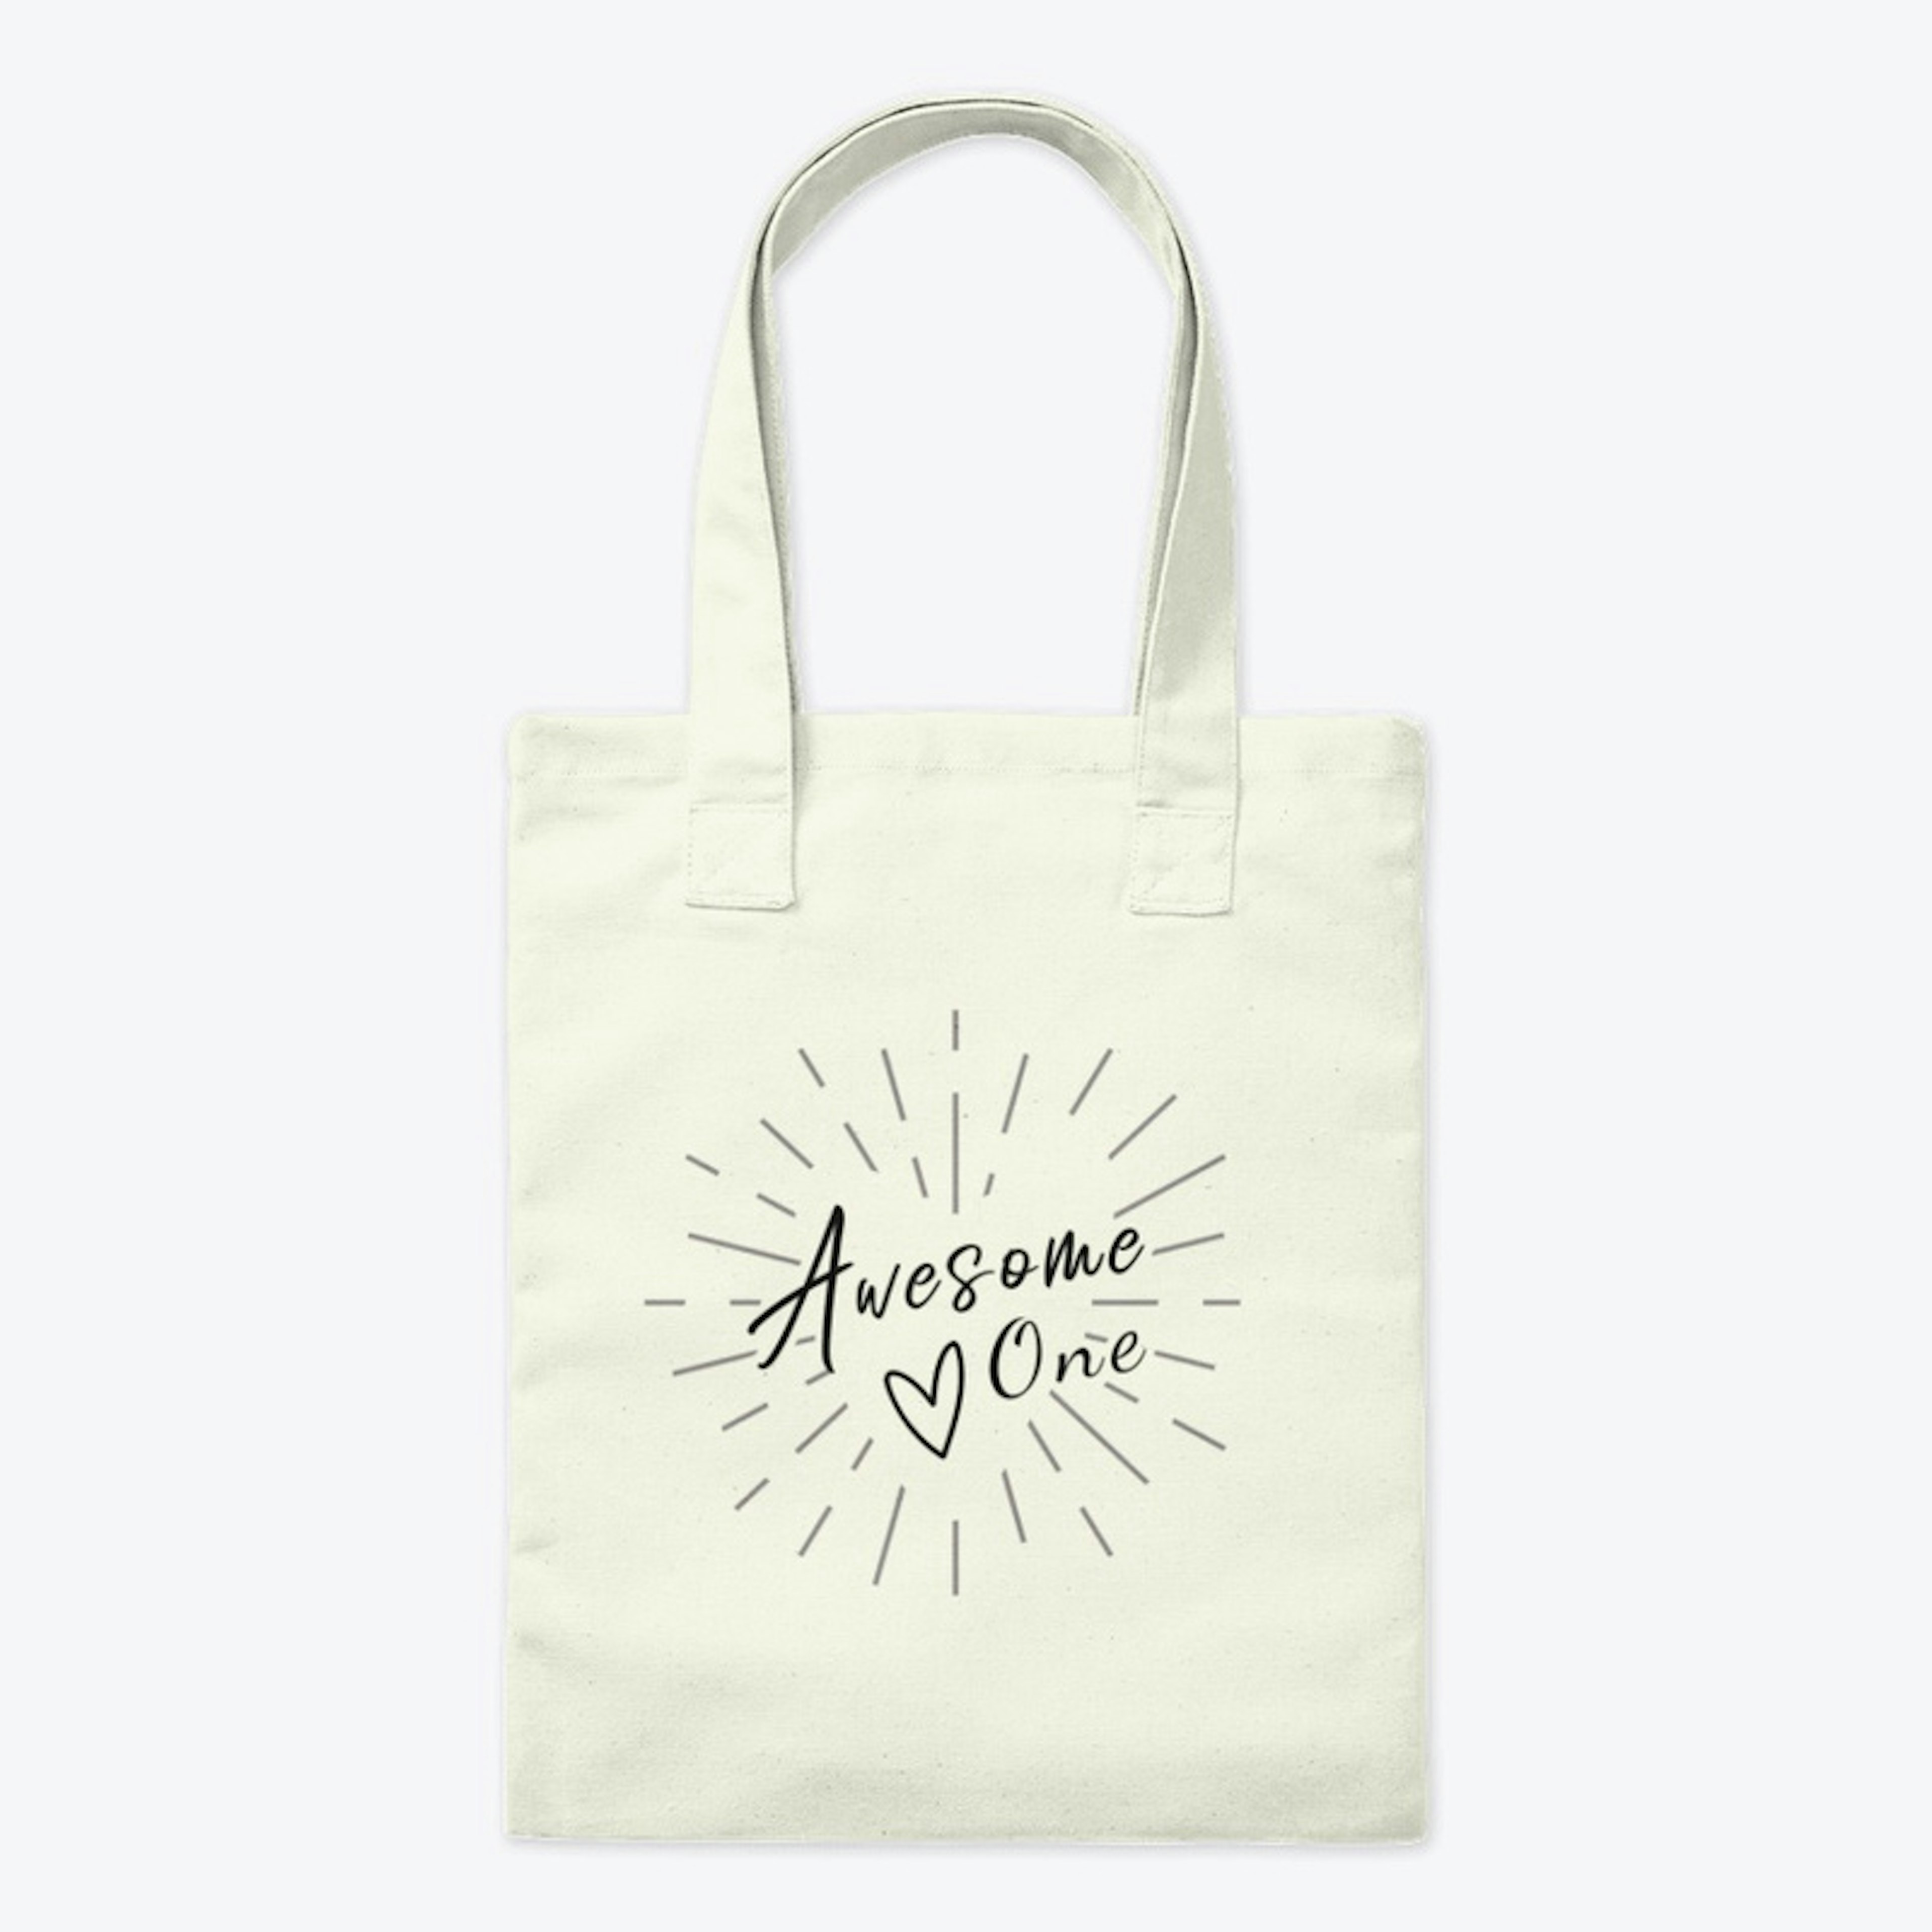 Awesome One Tote